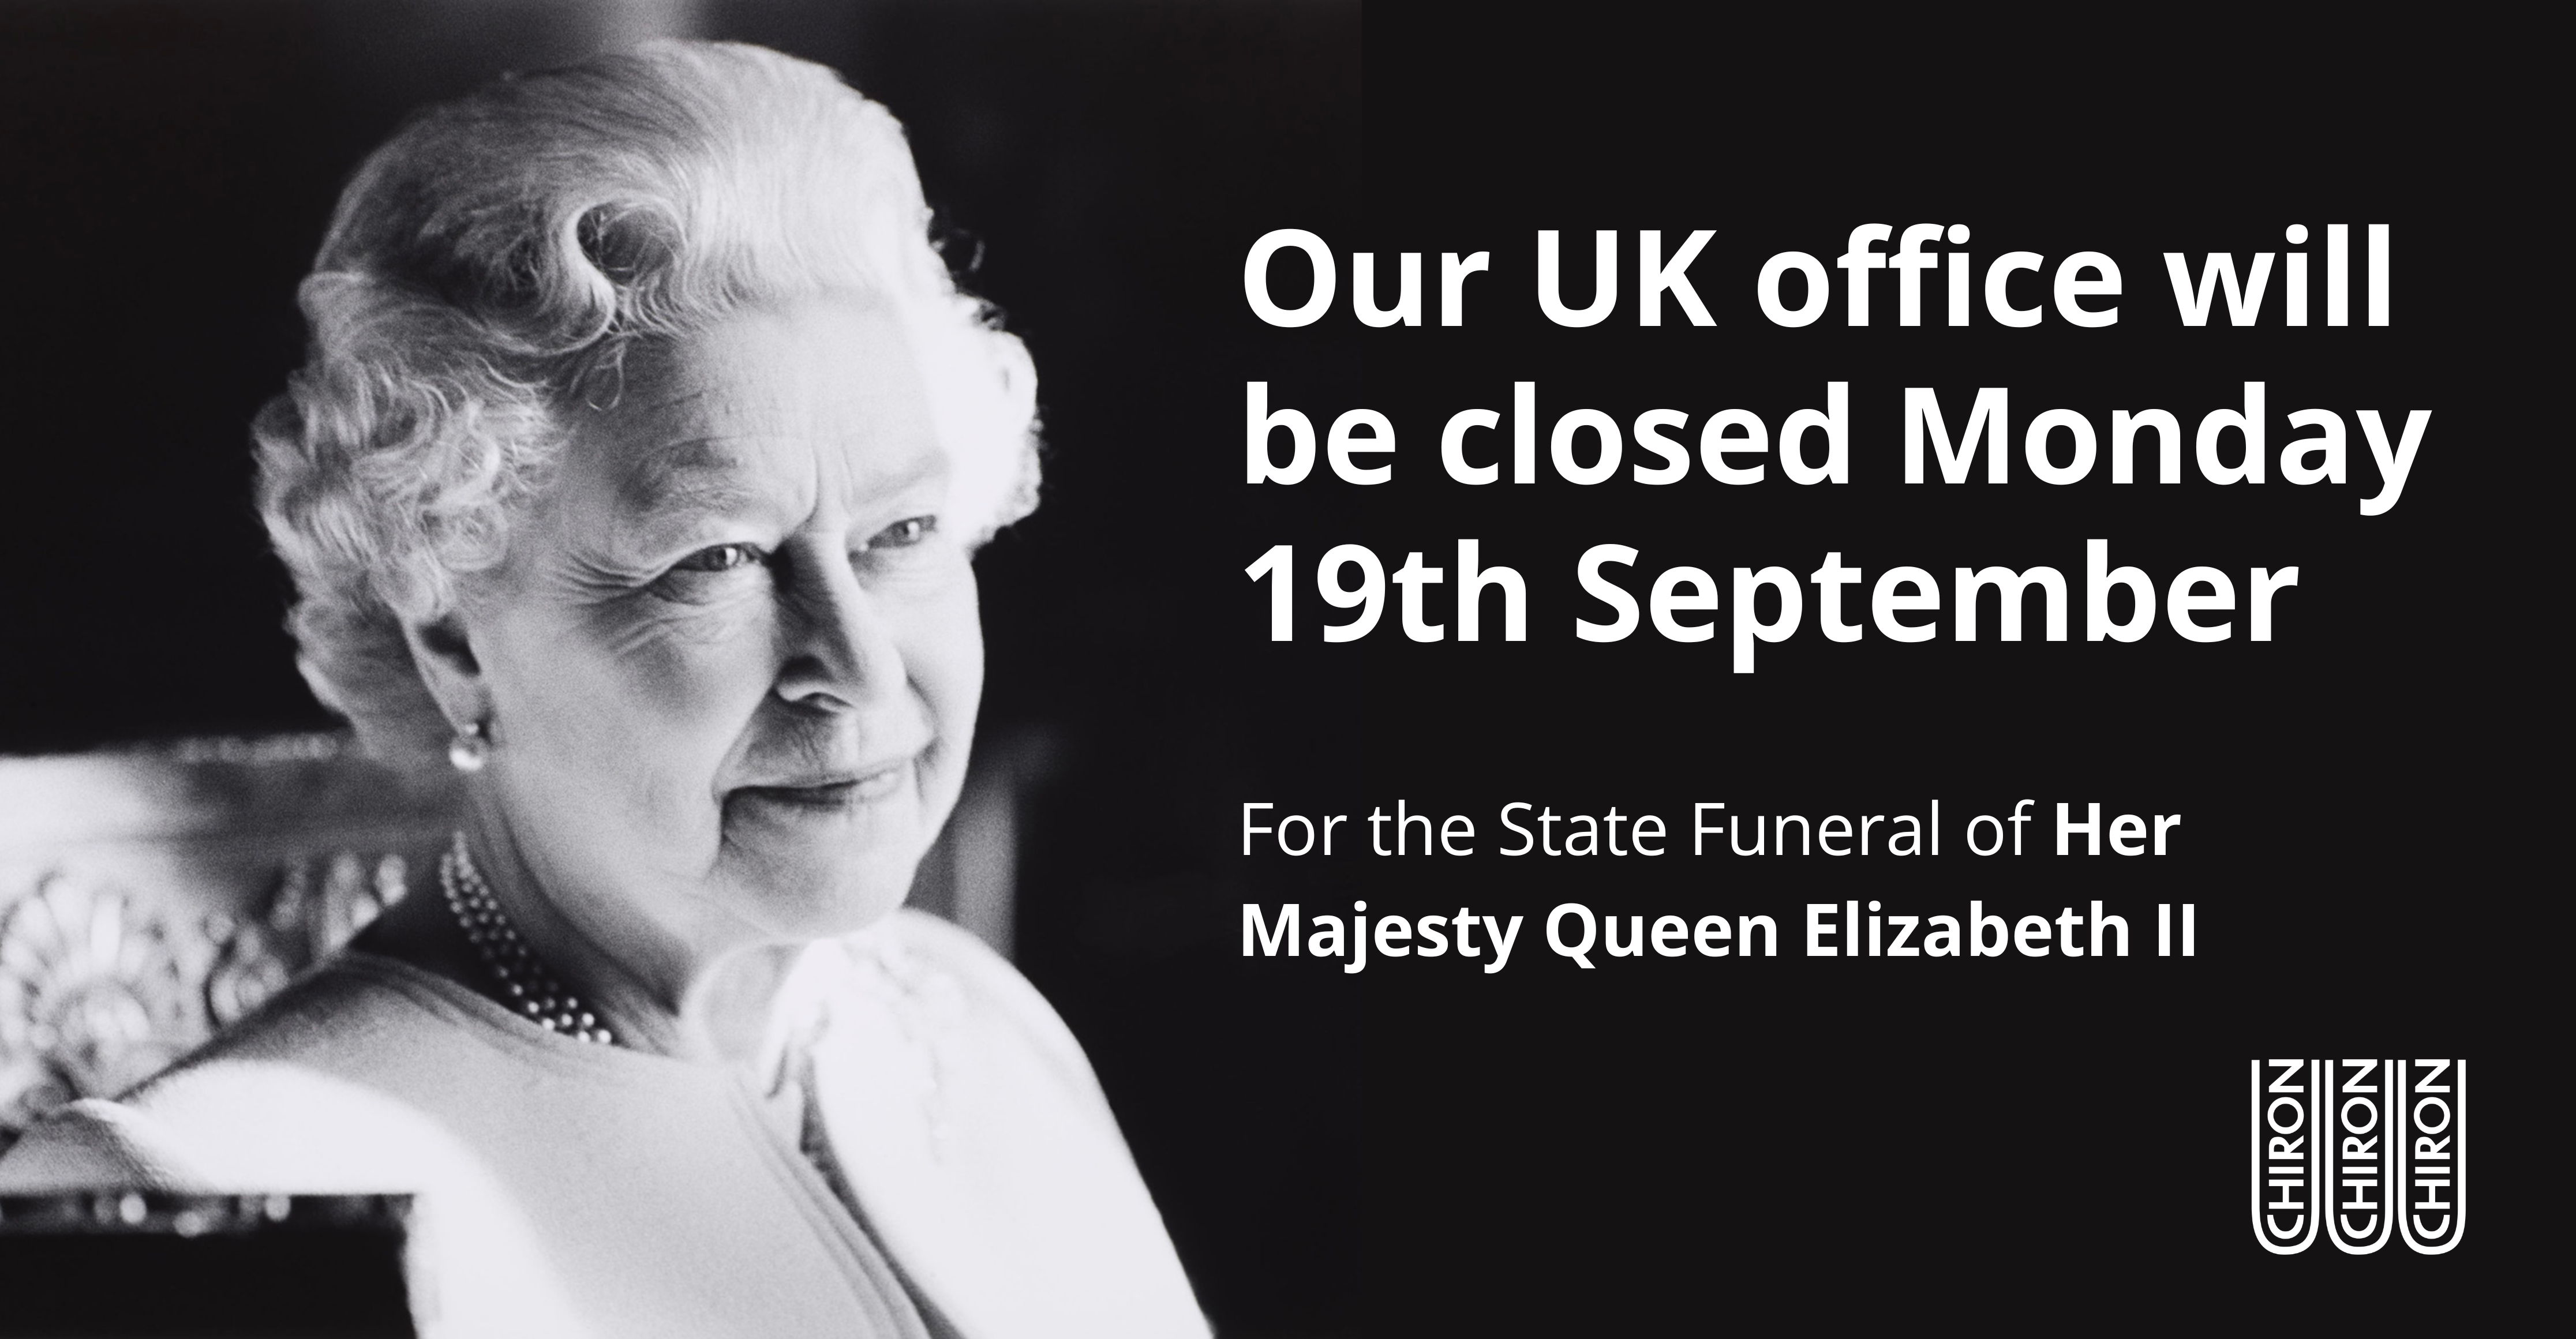 Our UK office will be closed on Monday 19th September